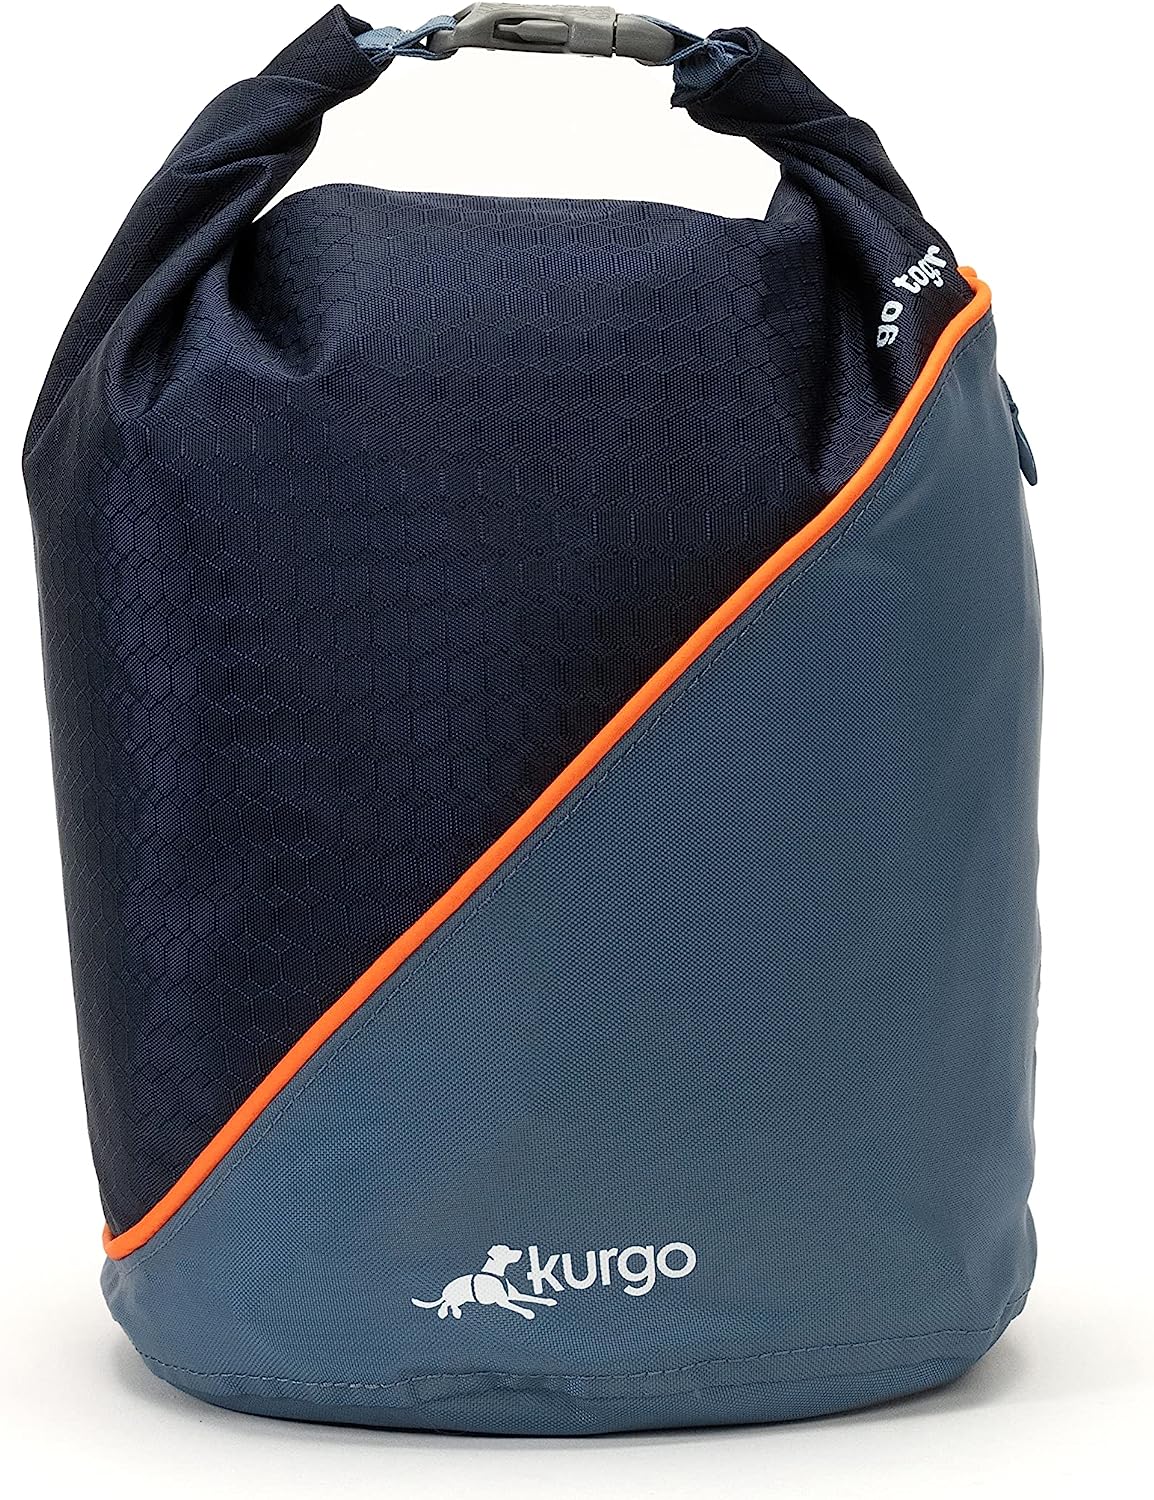 Kurgo Kibble Carrier Travel Dog Food Container